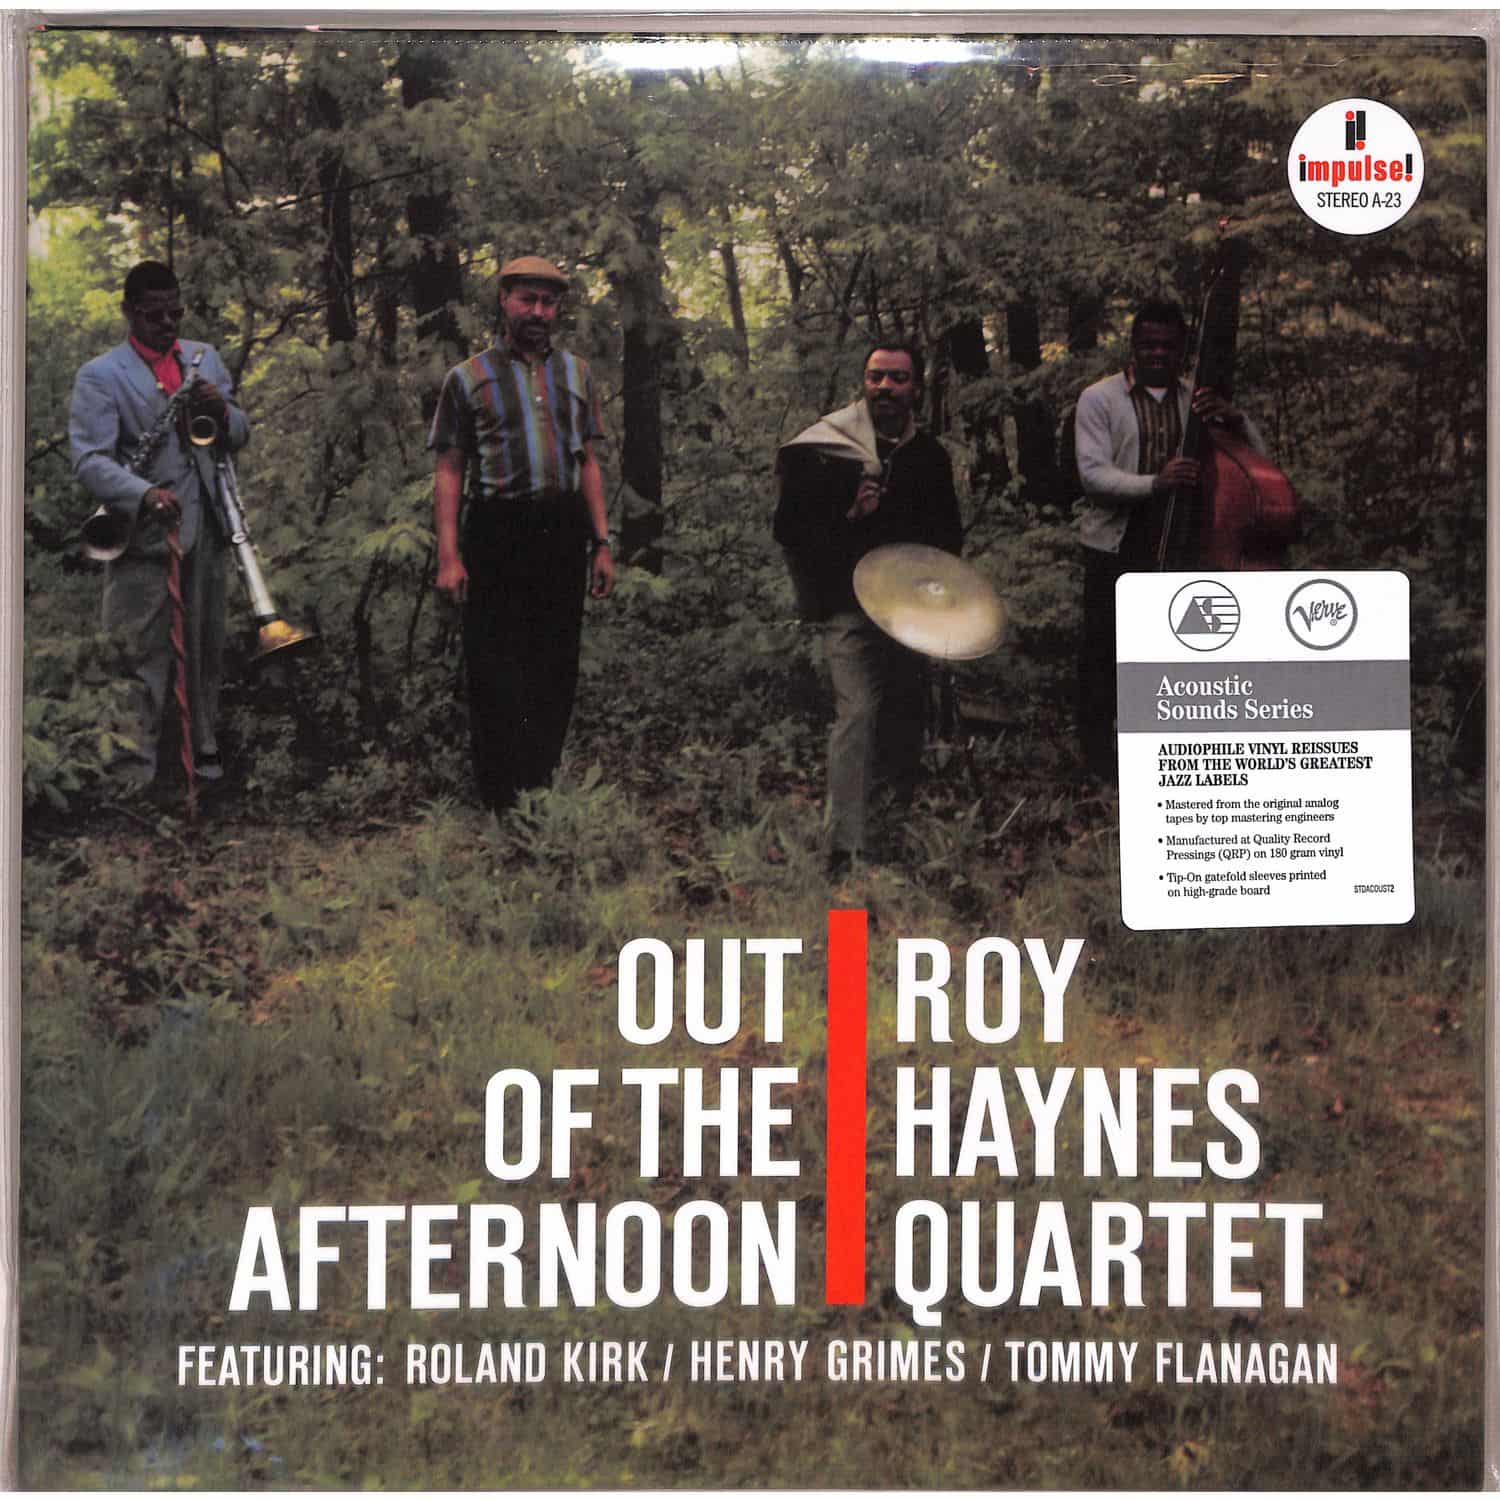 Roy Haynes - OUT OF THE AFTERNOON 